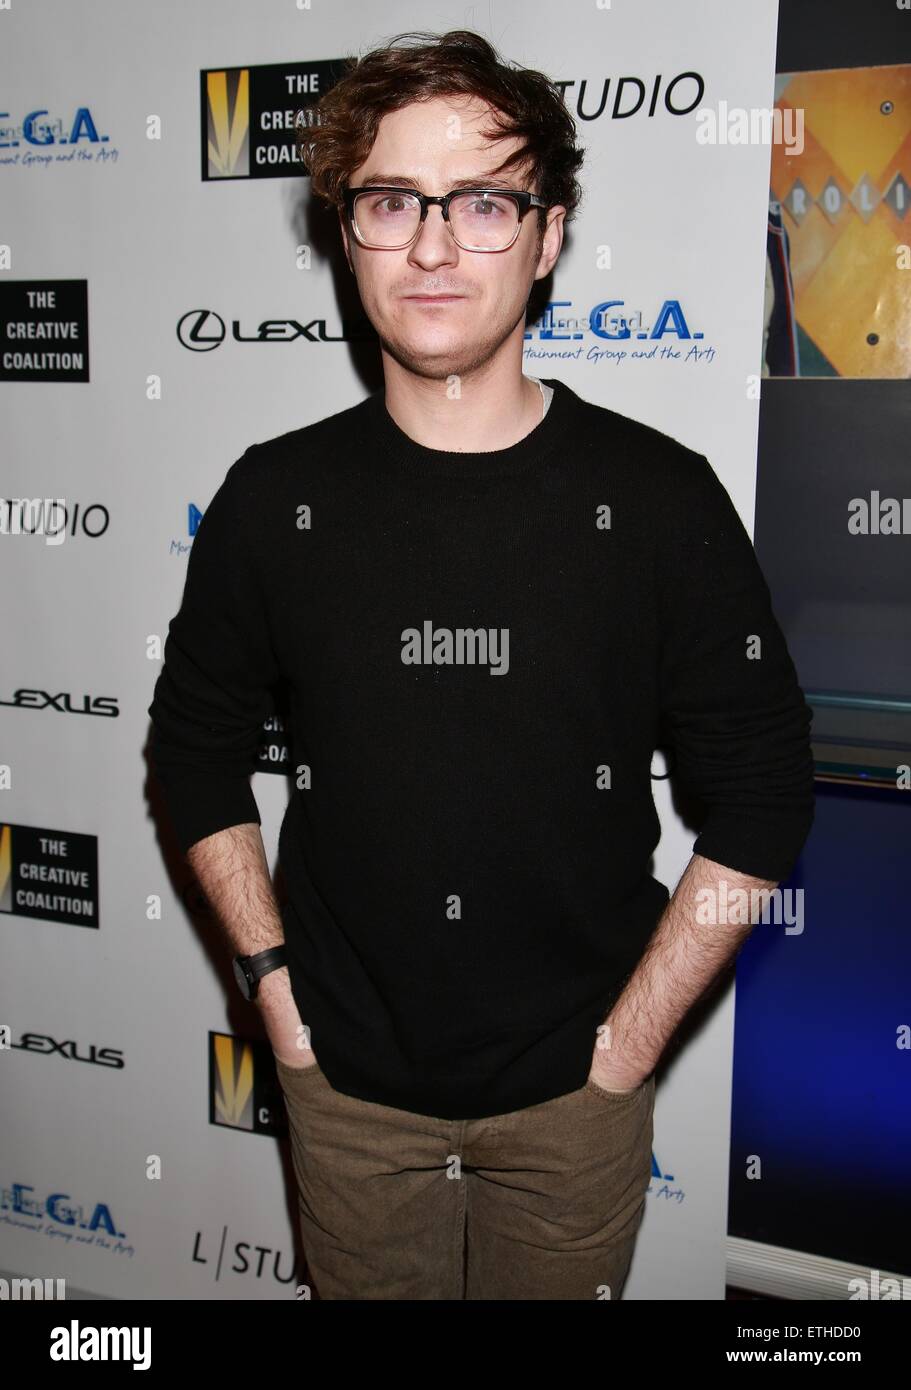 New York premiere party of 'Cop Show' at Caroline's On Broadway Comedy Club - Arrivals  Featuring: Griffin Newman Where: New York, New York, United States When: 23 Feb 2015 Credit: Joseph Marzullo/WENN.com Stock Photo